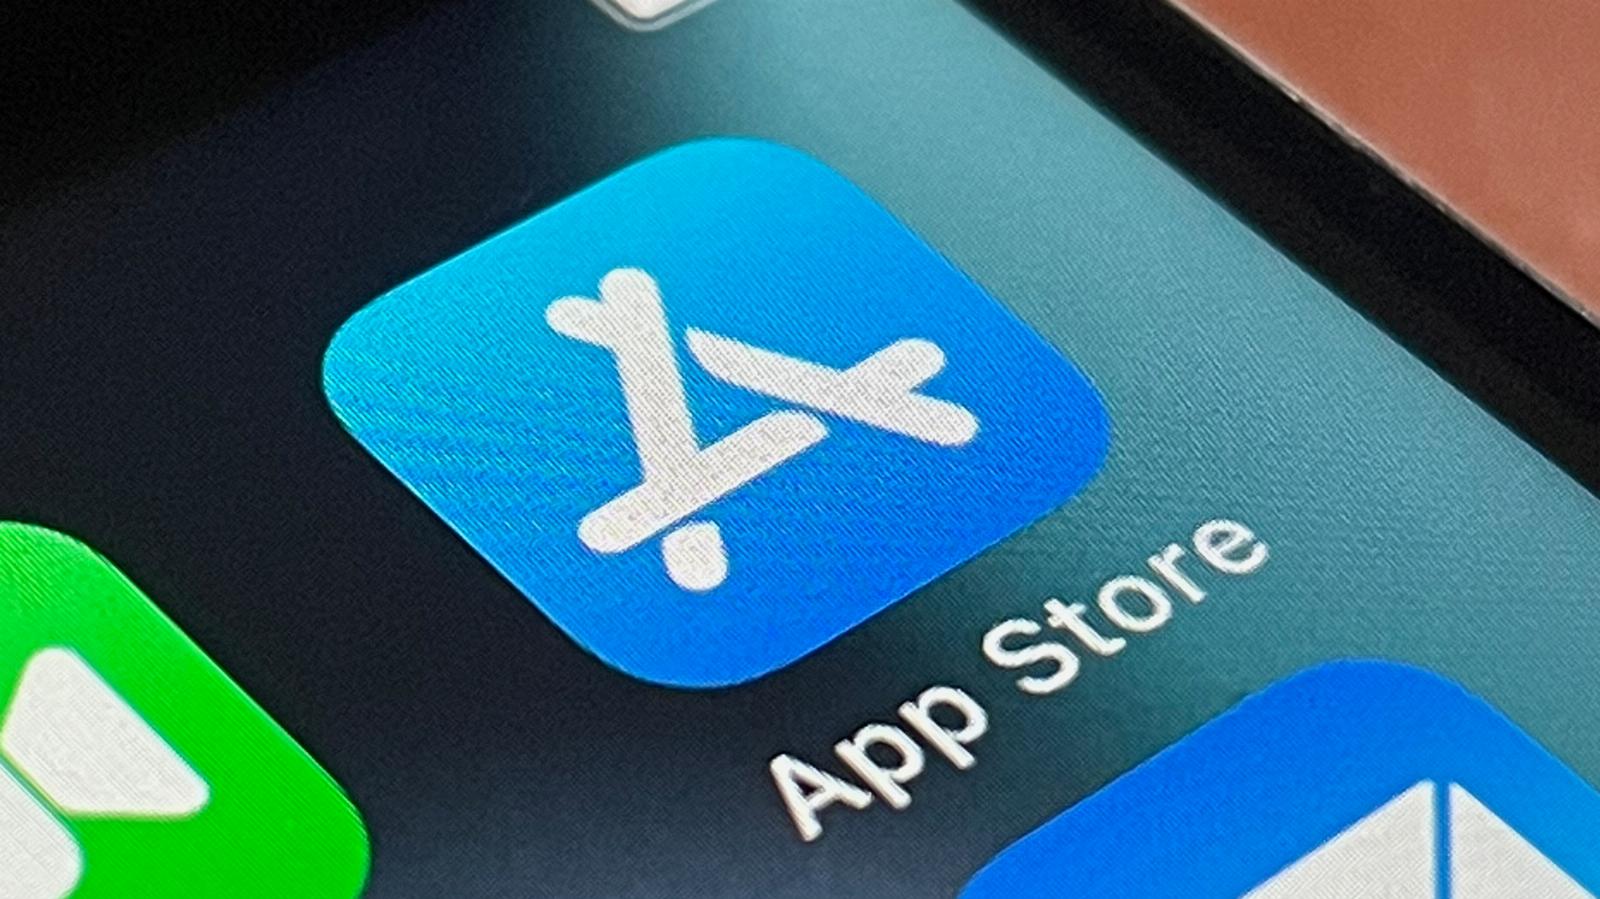 Apple’s newest feature helps solve App Store billing issues without bugging developers